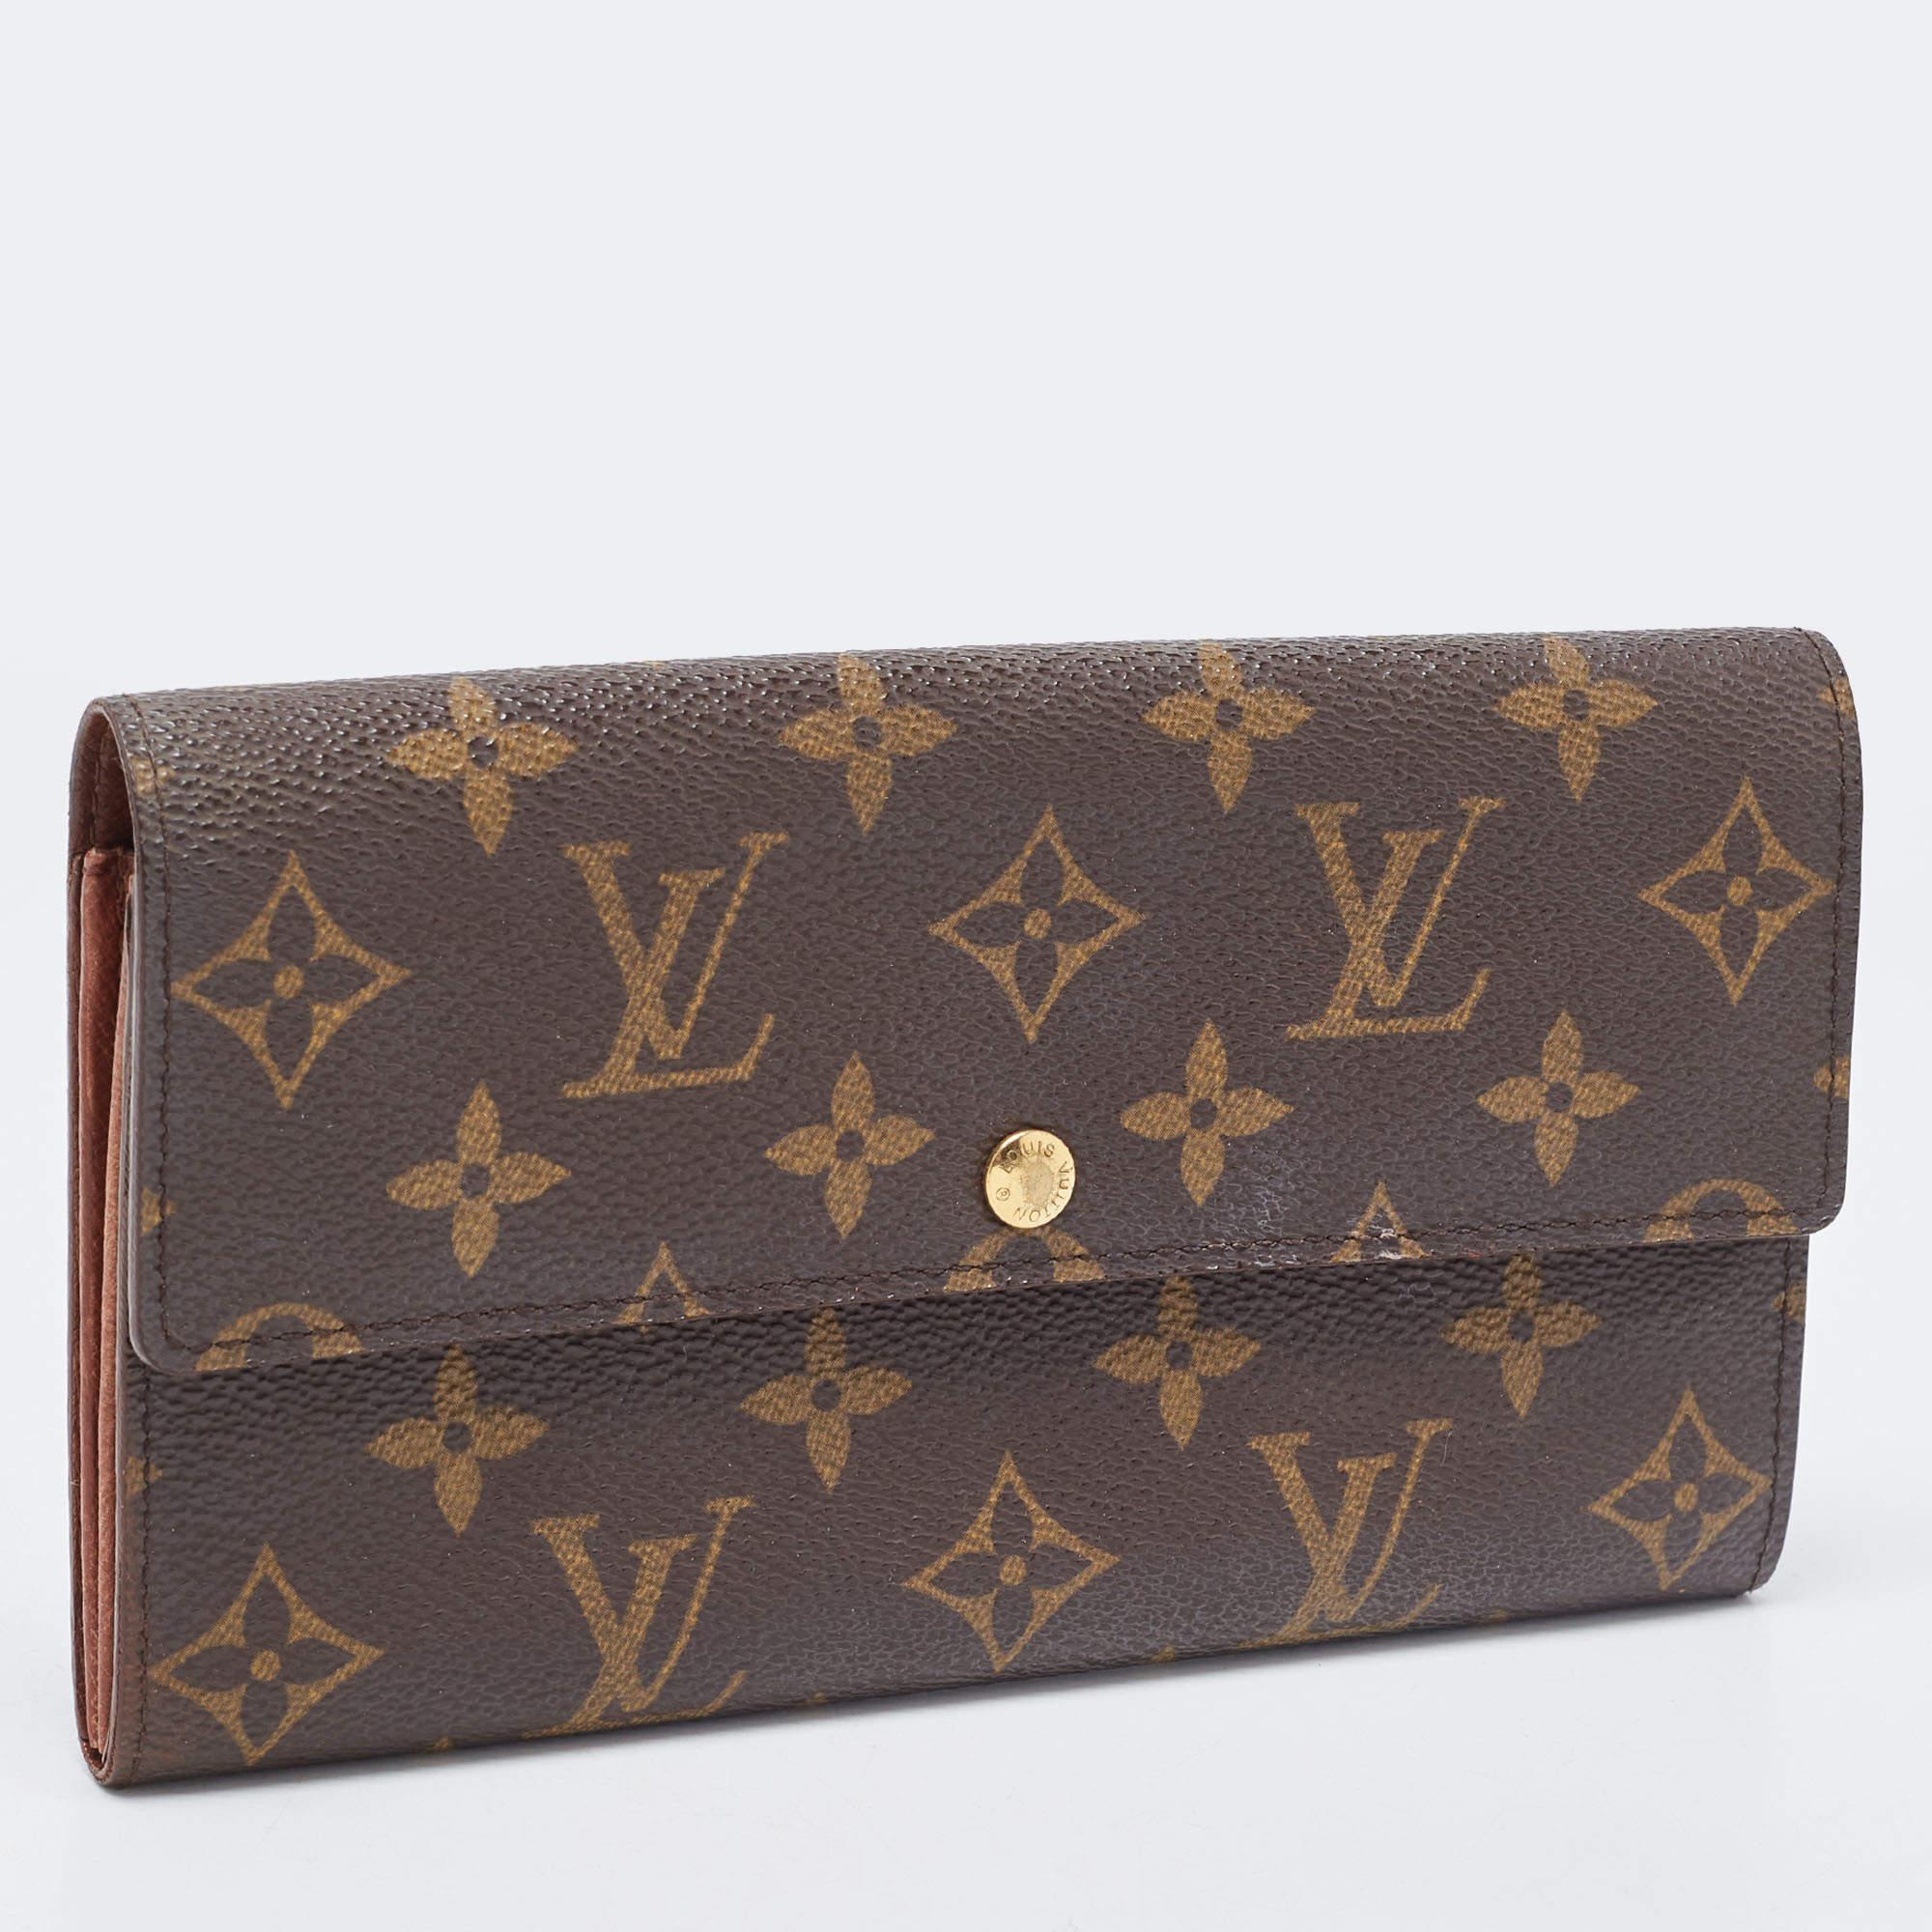 A beautiful wallet for stylish women, this LV wallet is perfect to be carried solo or inside your tote while you step out to run errands. It is a durable accessory.

